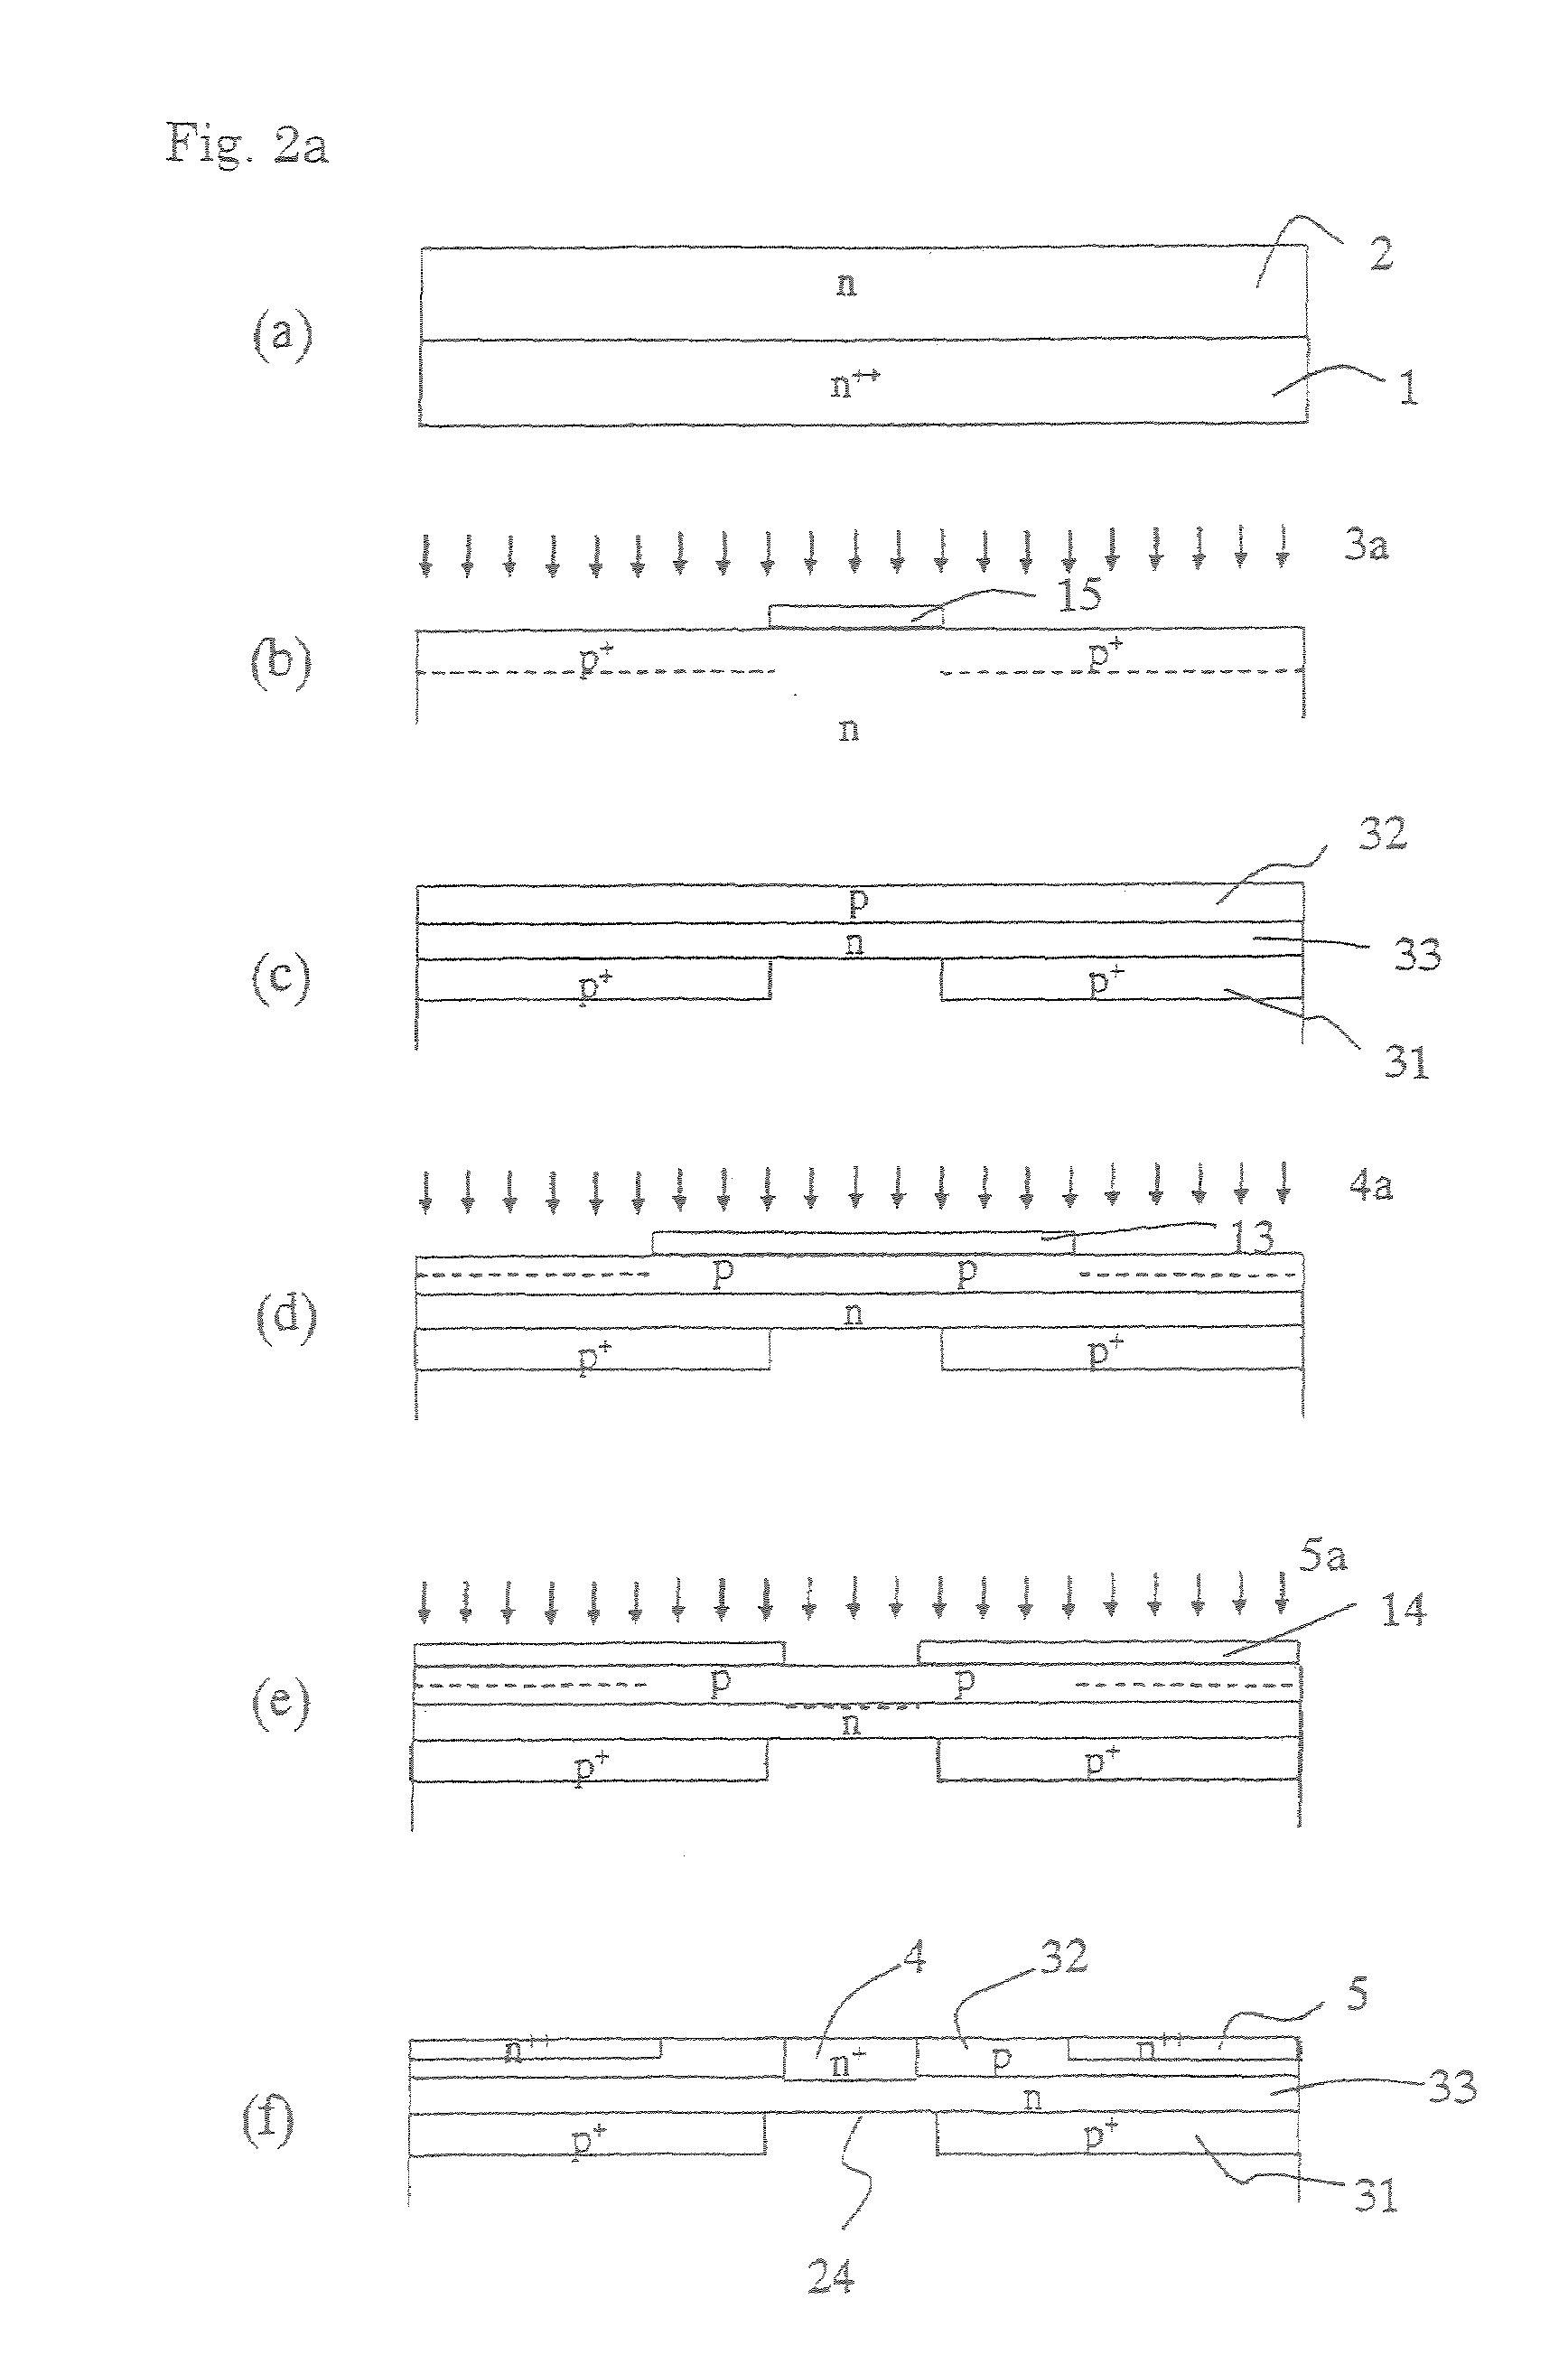 Silicon carbide mos field-effect transistor and process for producing the same